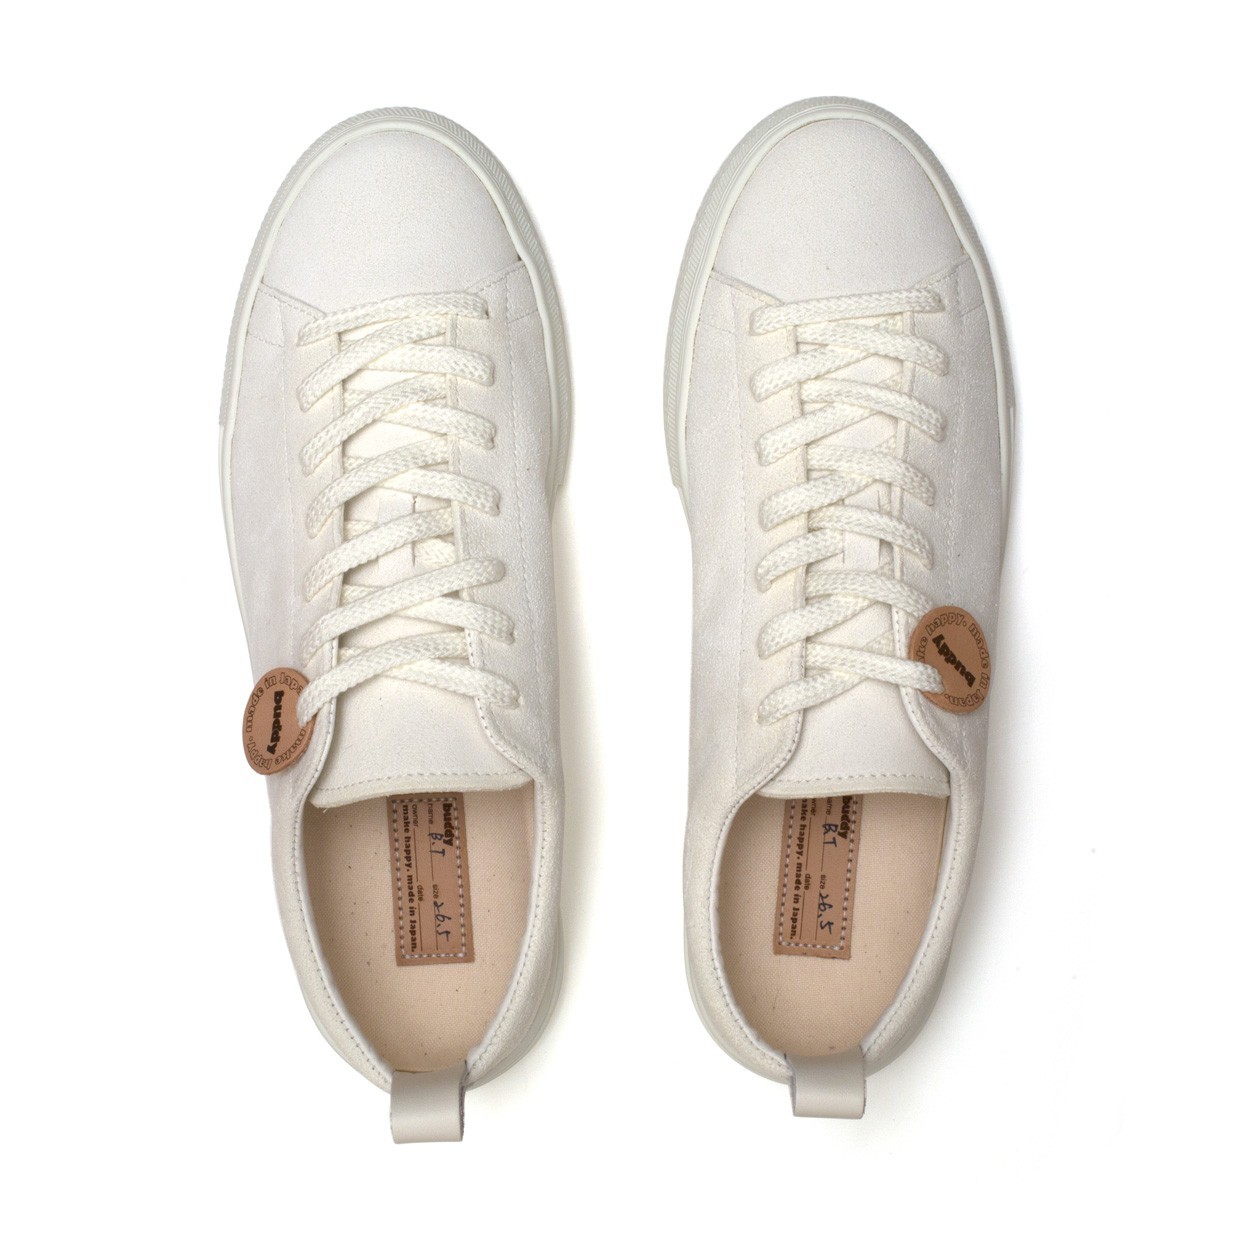 Bull Terrier Low Chubby Suede Blanc